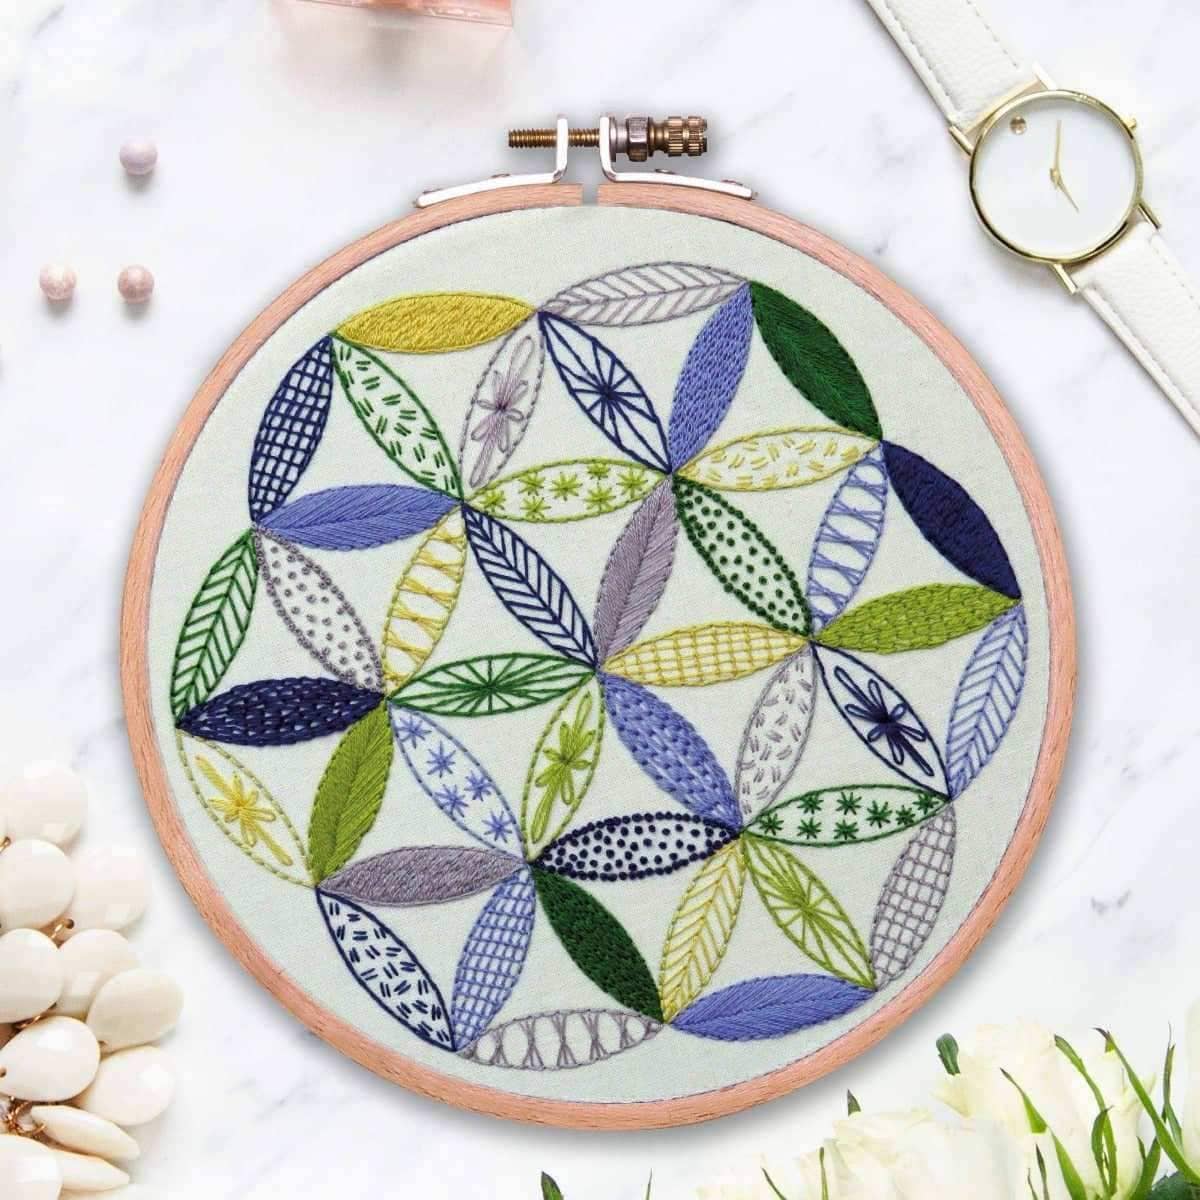 Easy Embroidery Kit for Beginners Floral Stitch Sampler Wildflower and  Butterfly Nature Theme 7 Hoop Thoughtful Craft Gift 